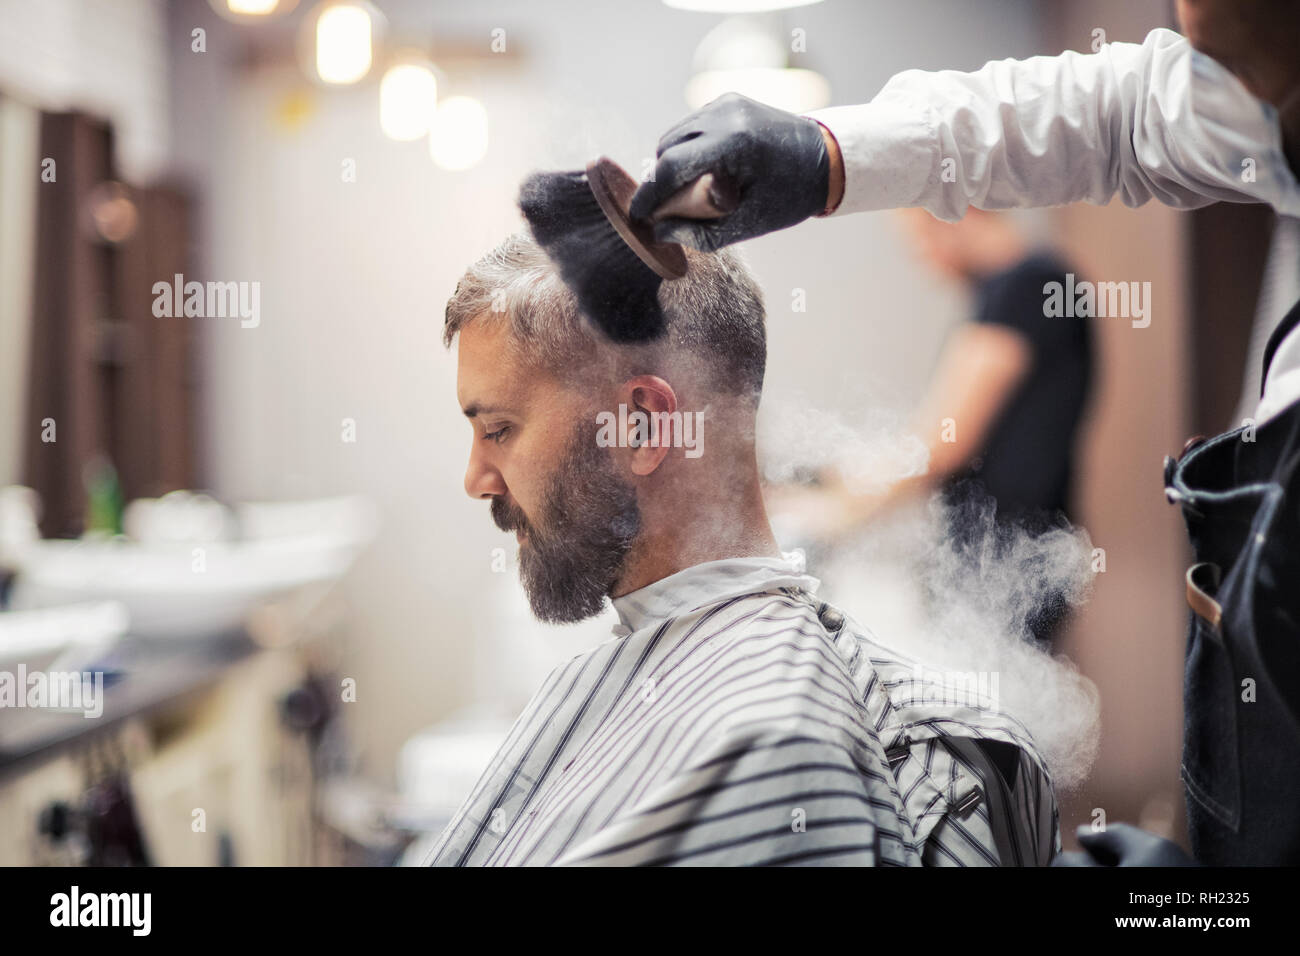 Handsome hipster man client visiting haidresser and hairstylist in barber shop, smoking a pipe. Stock Photo